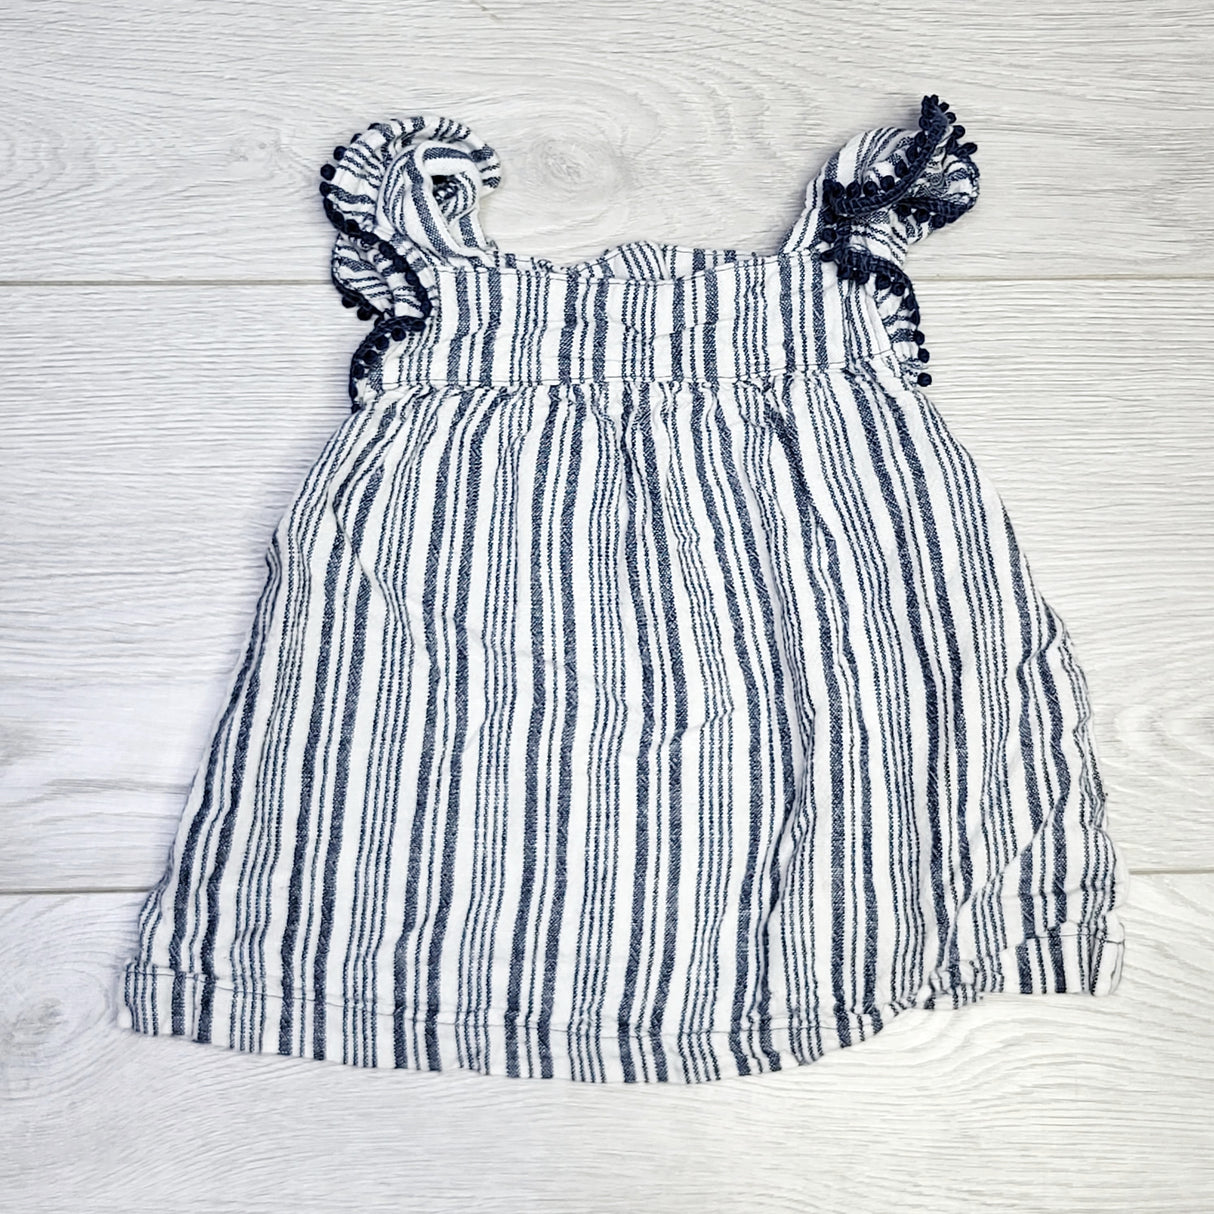 CRTH1- Carters blue and white striped sleeveless linen top. Size 18 months